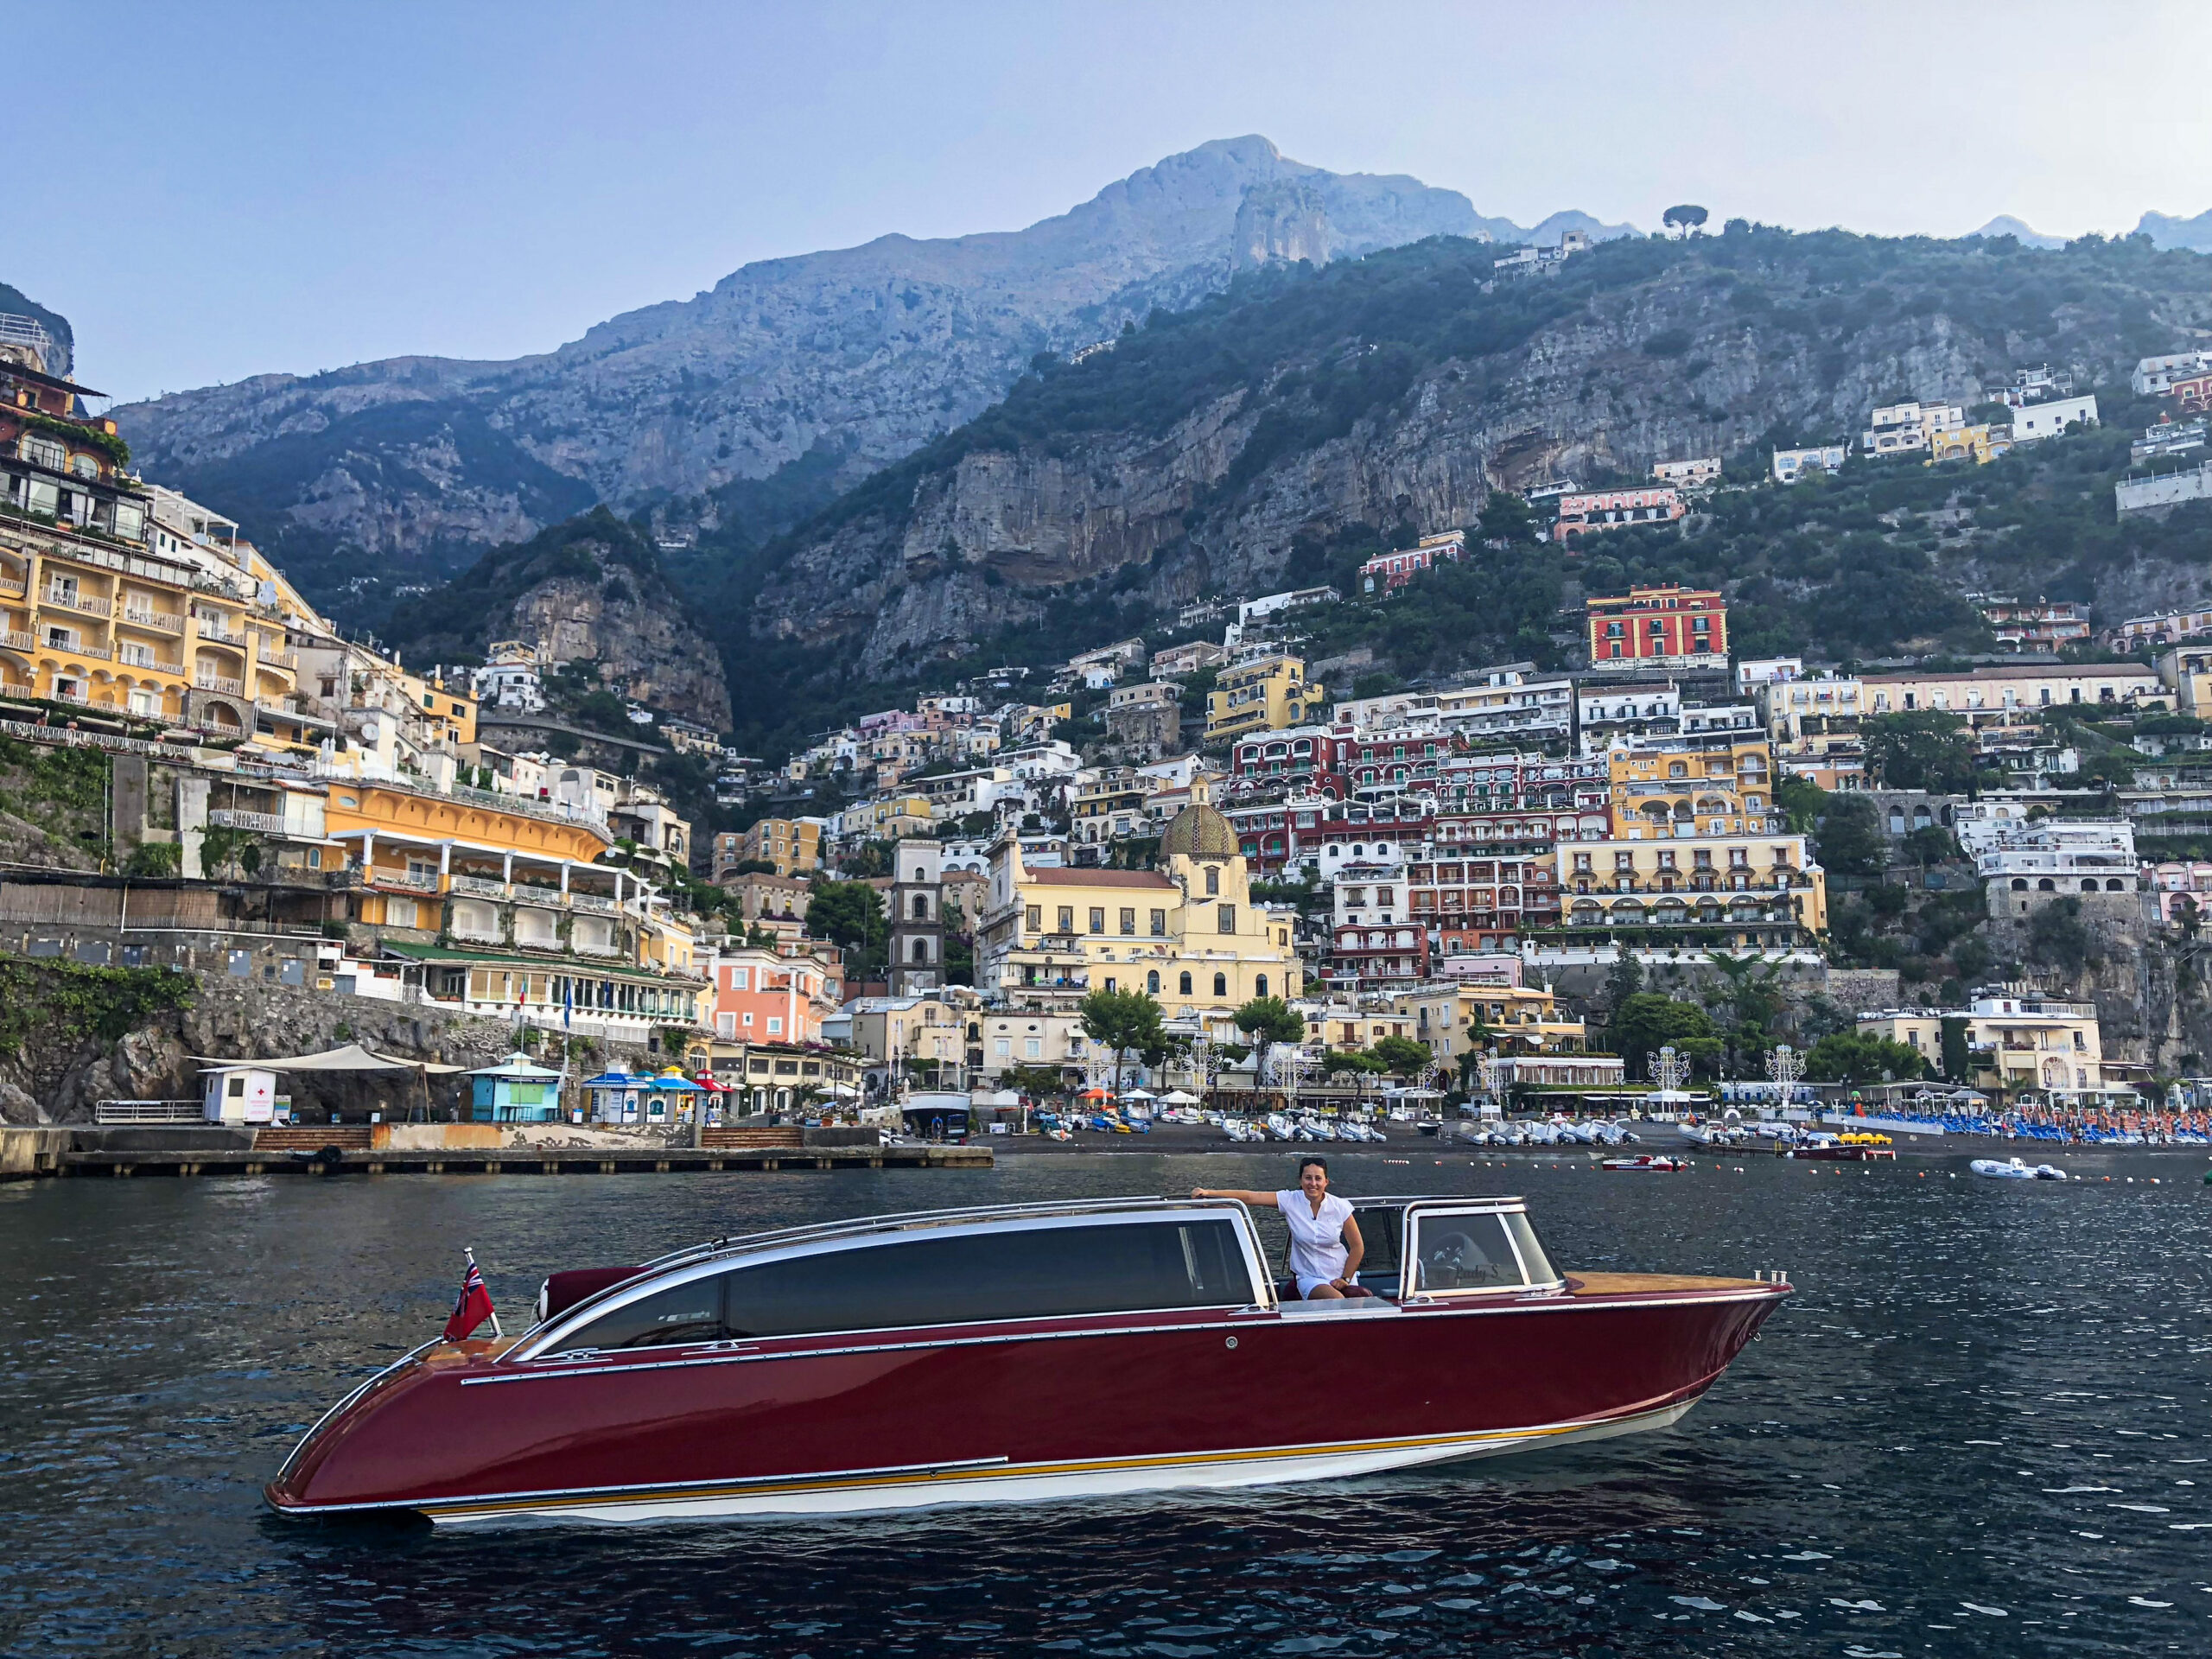 Positano from a tender driven by bosun